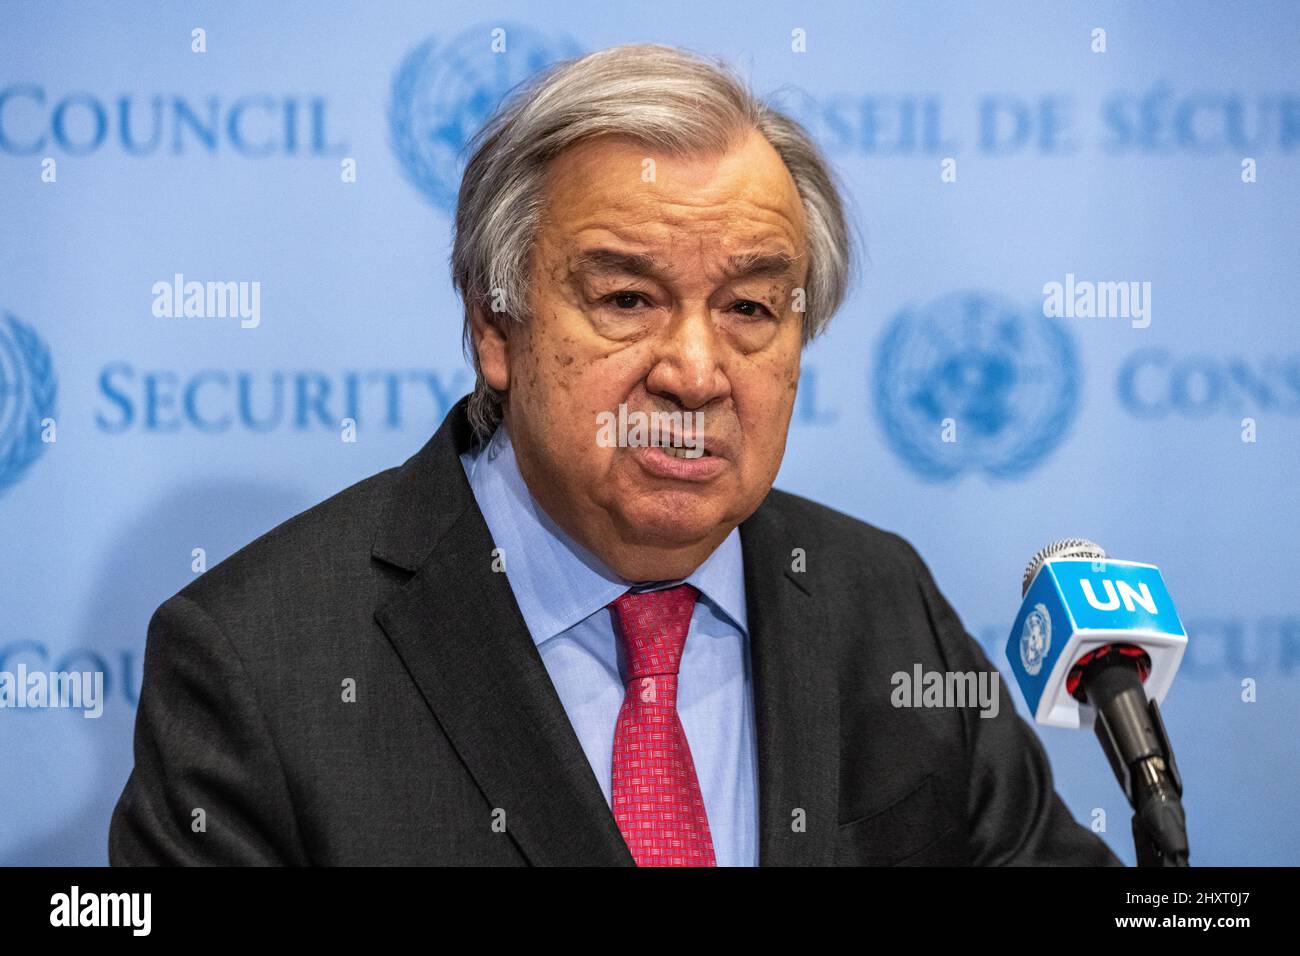 New York, USA. 14th Mar, 2022. United Nations Secretary-General Antonio Guterres talks to reporters after a UN Security Council meeting at the UN headquarters in New York city. Guterres said that 'It is time to stop the horror unleashed on the people of Ukraine and get on the path of diplomacy and peace,' and also stressed that 'The prospect of nuclear conflict, once unthinkable, is now back within the realm of possibility,' Credit: Enrique Shore/Alamy Live News Stock Photo